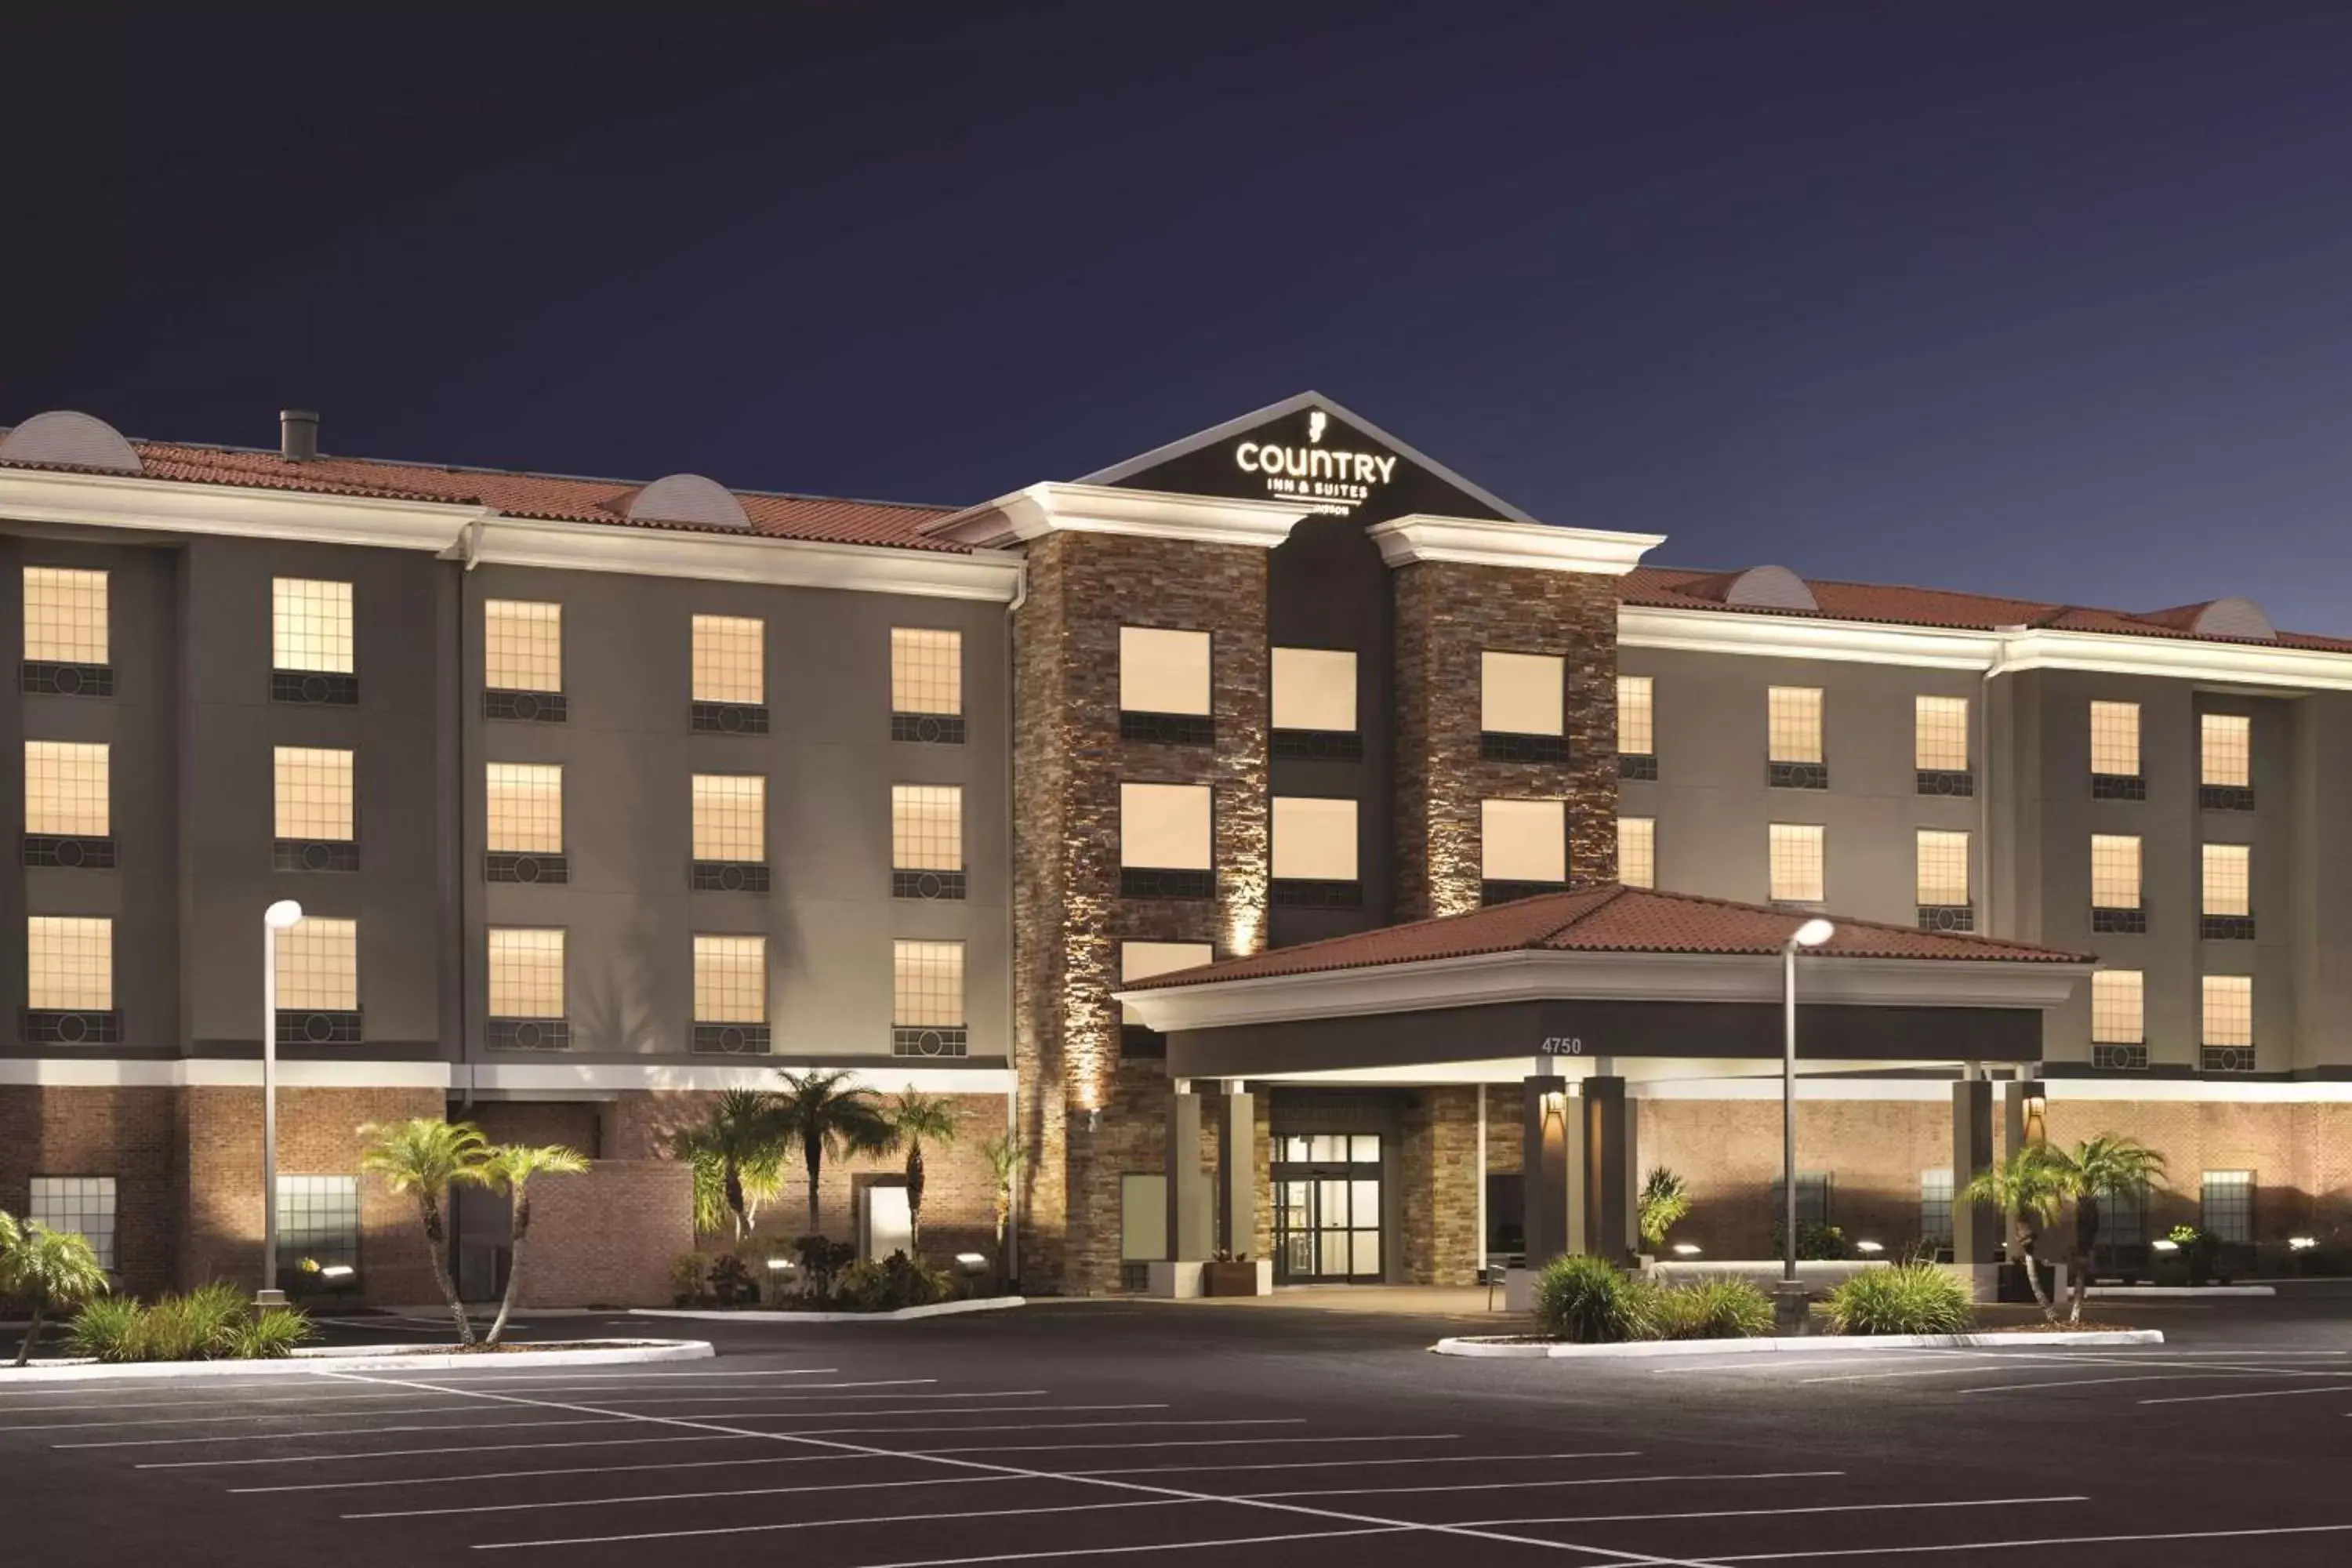 Property Building in Country Inn & Suites by Radisson, Tampa RJ Stadium